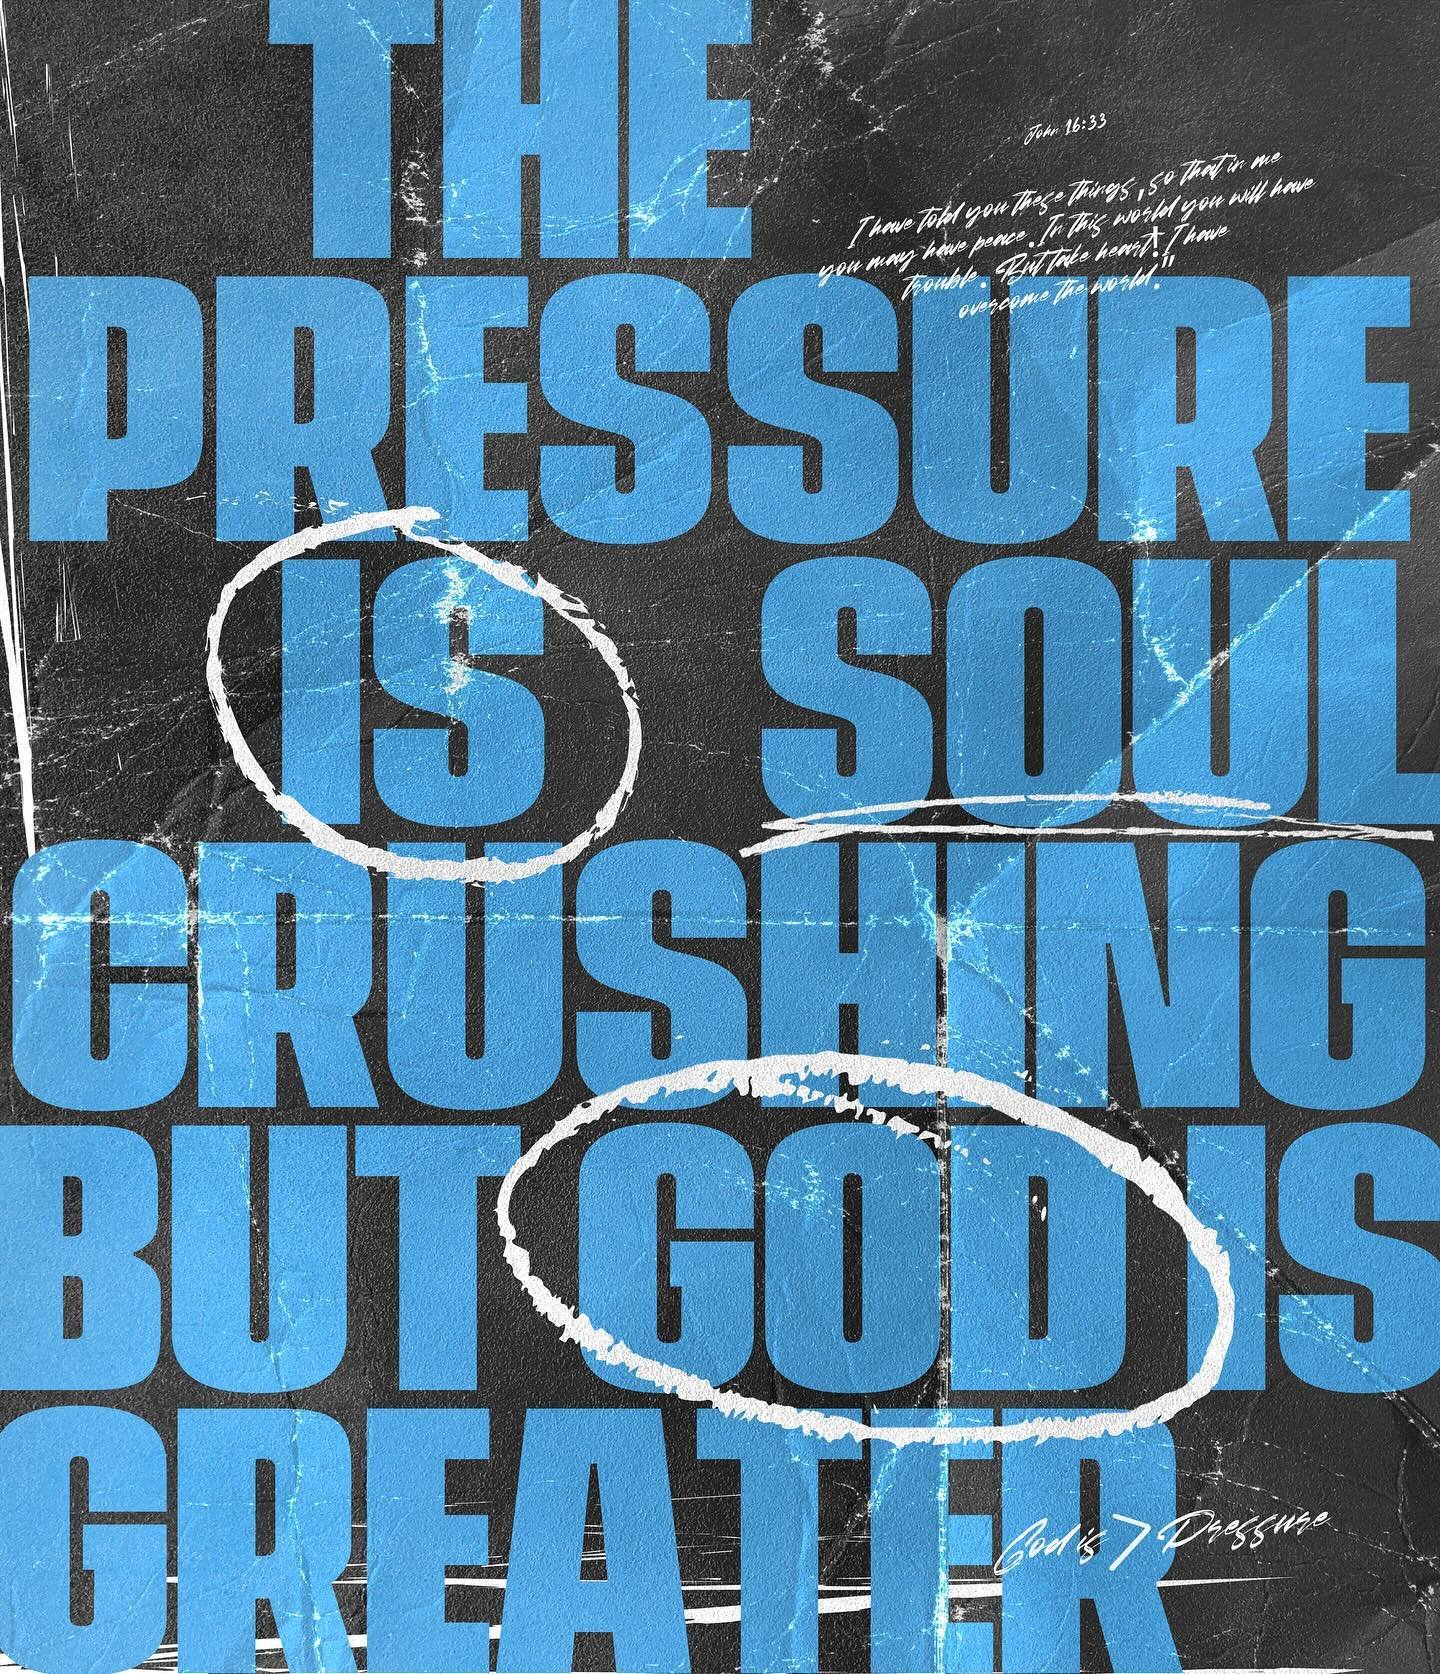 The pressure is great and can be soul crushing at times but remember God is Greater.

John 16:33

33&nbsp;&ldquo;I have told you these things, so that in me you may have peace. In this world you will have trouble. But take heart! I have overcome the 